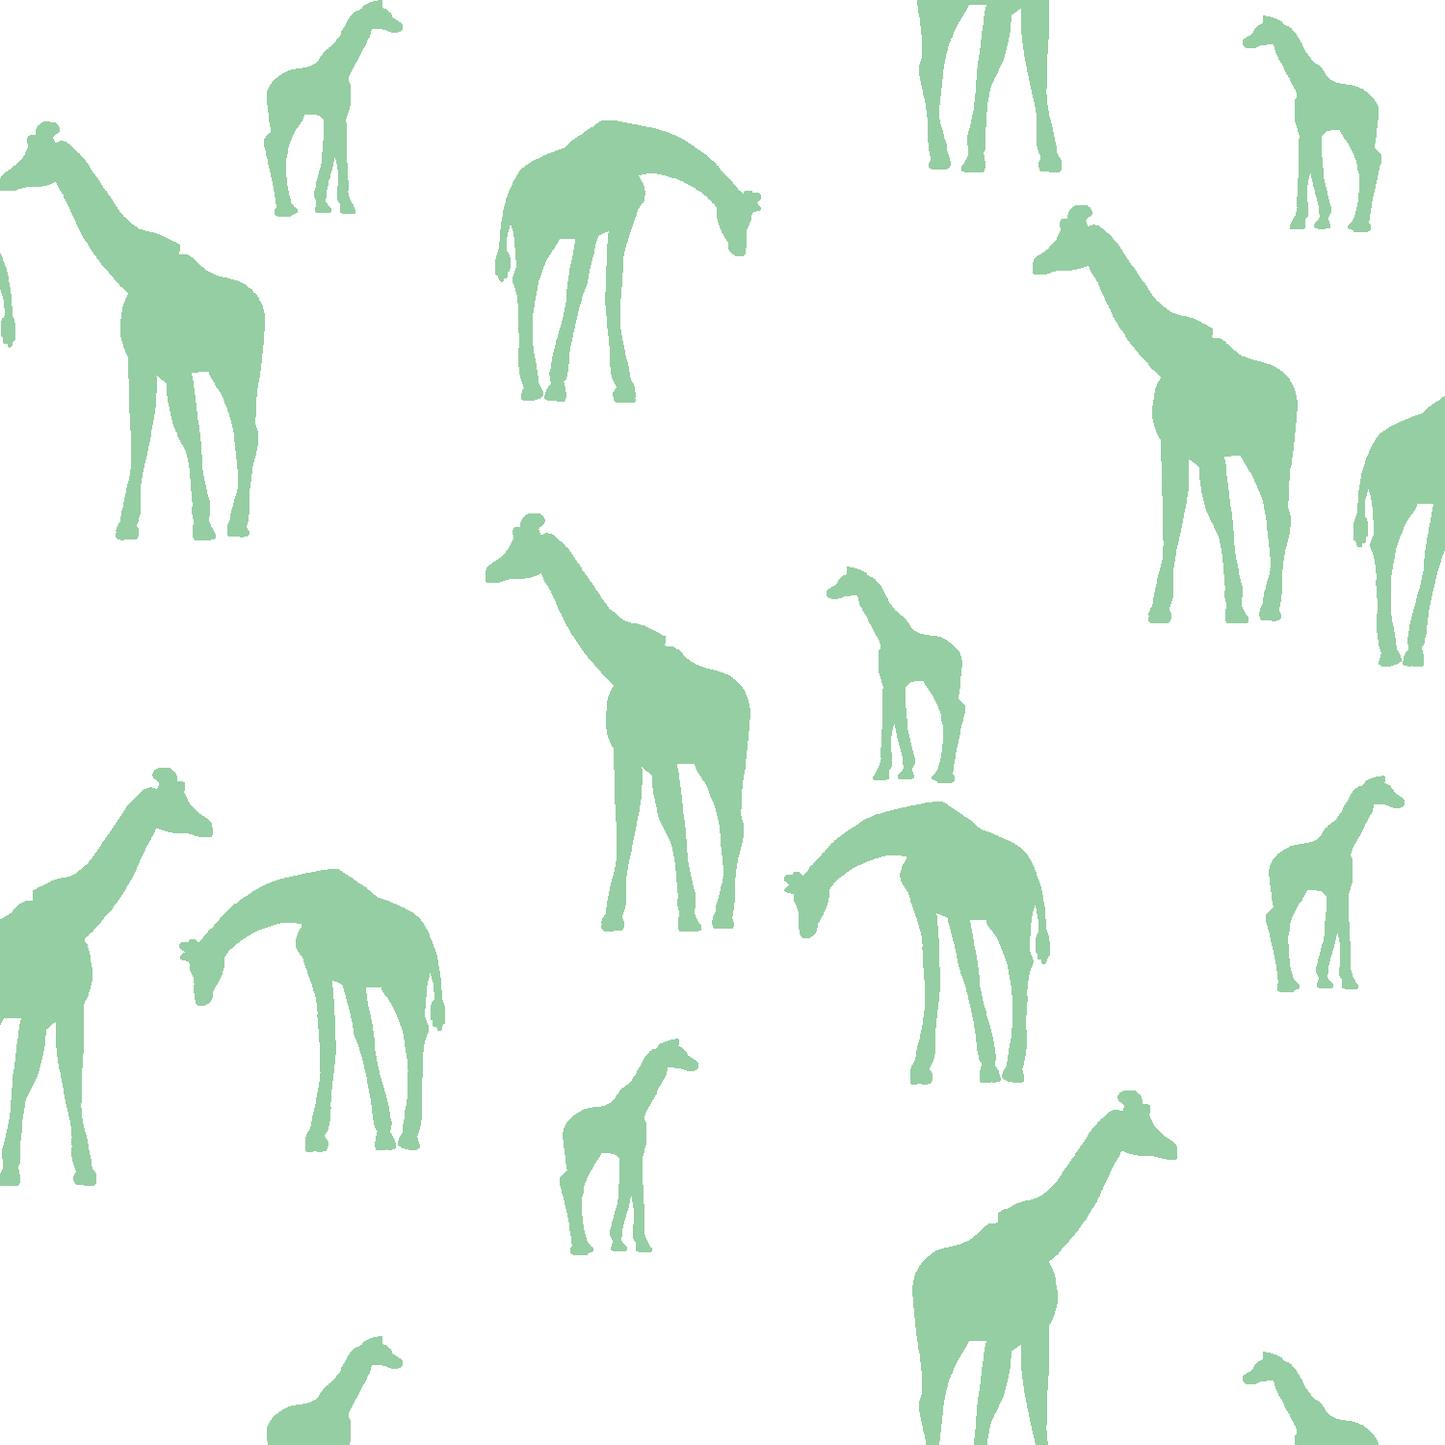 Giraffe Silhouette in Sprout on White